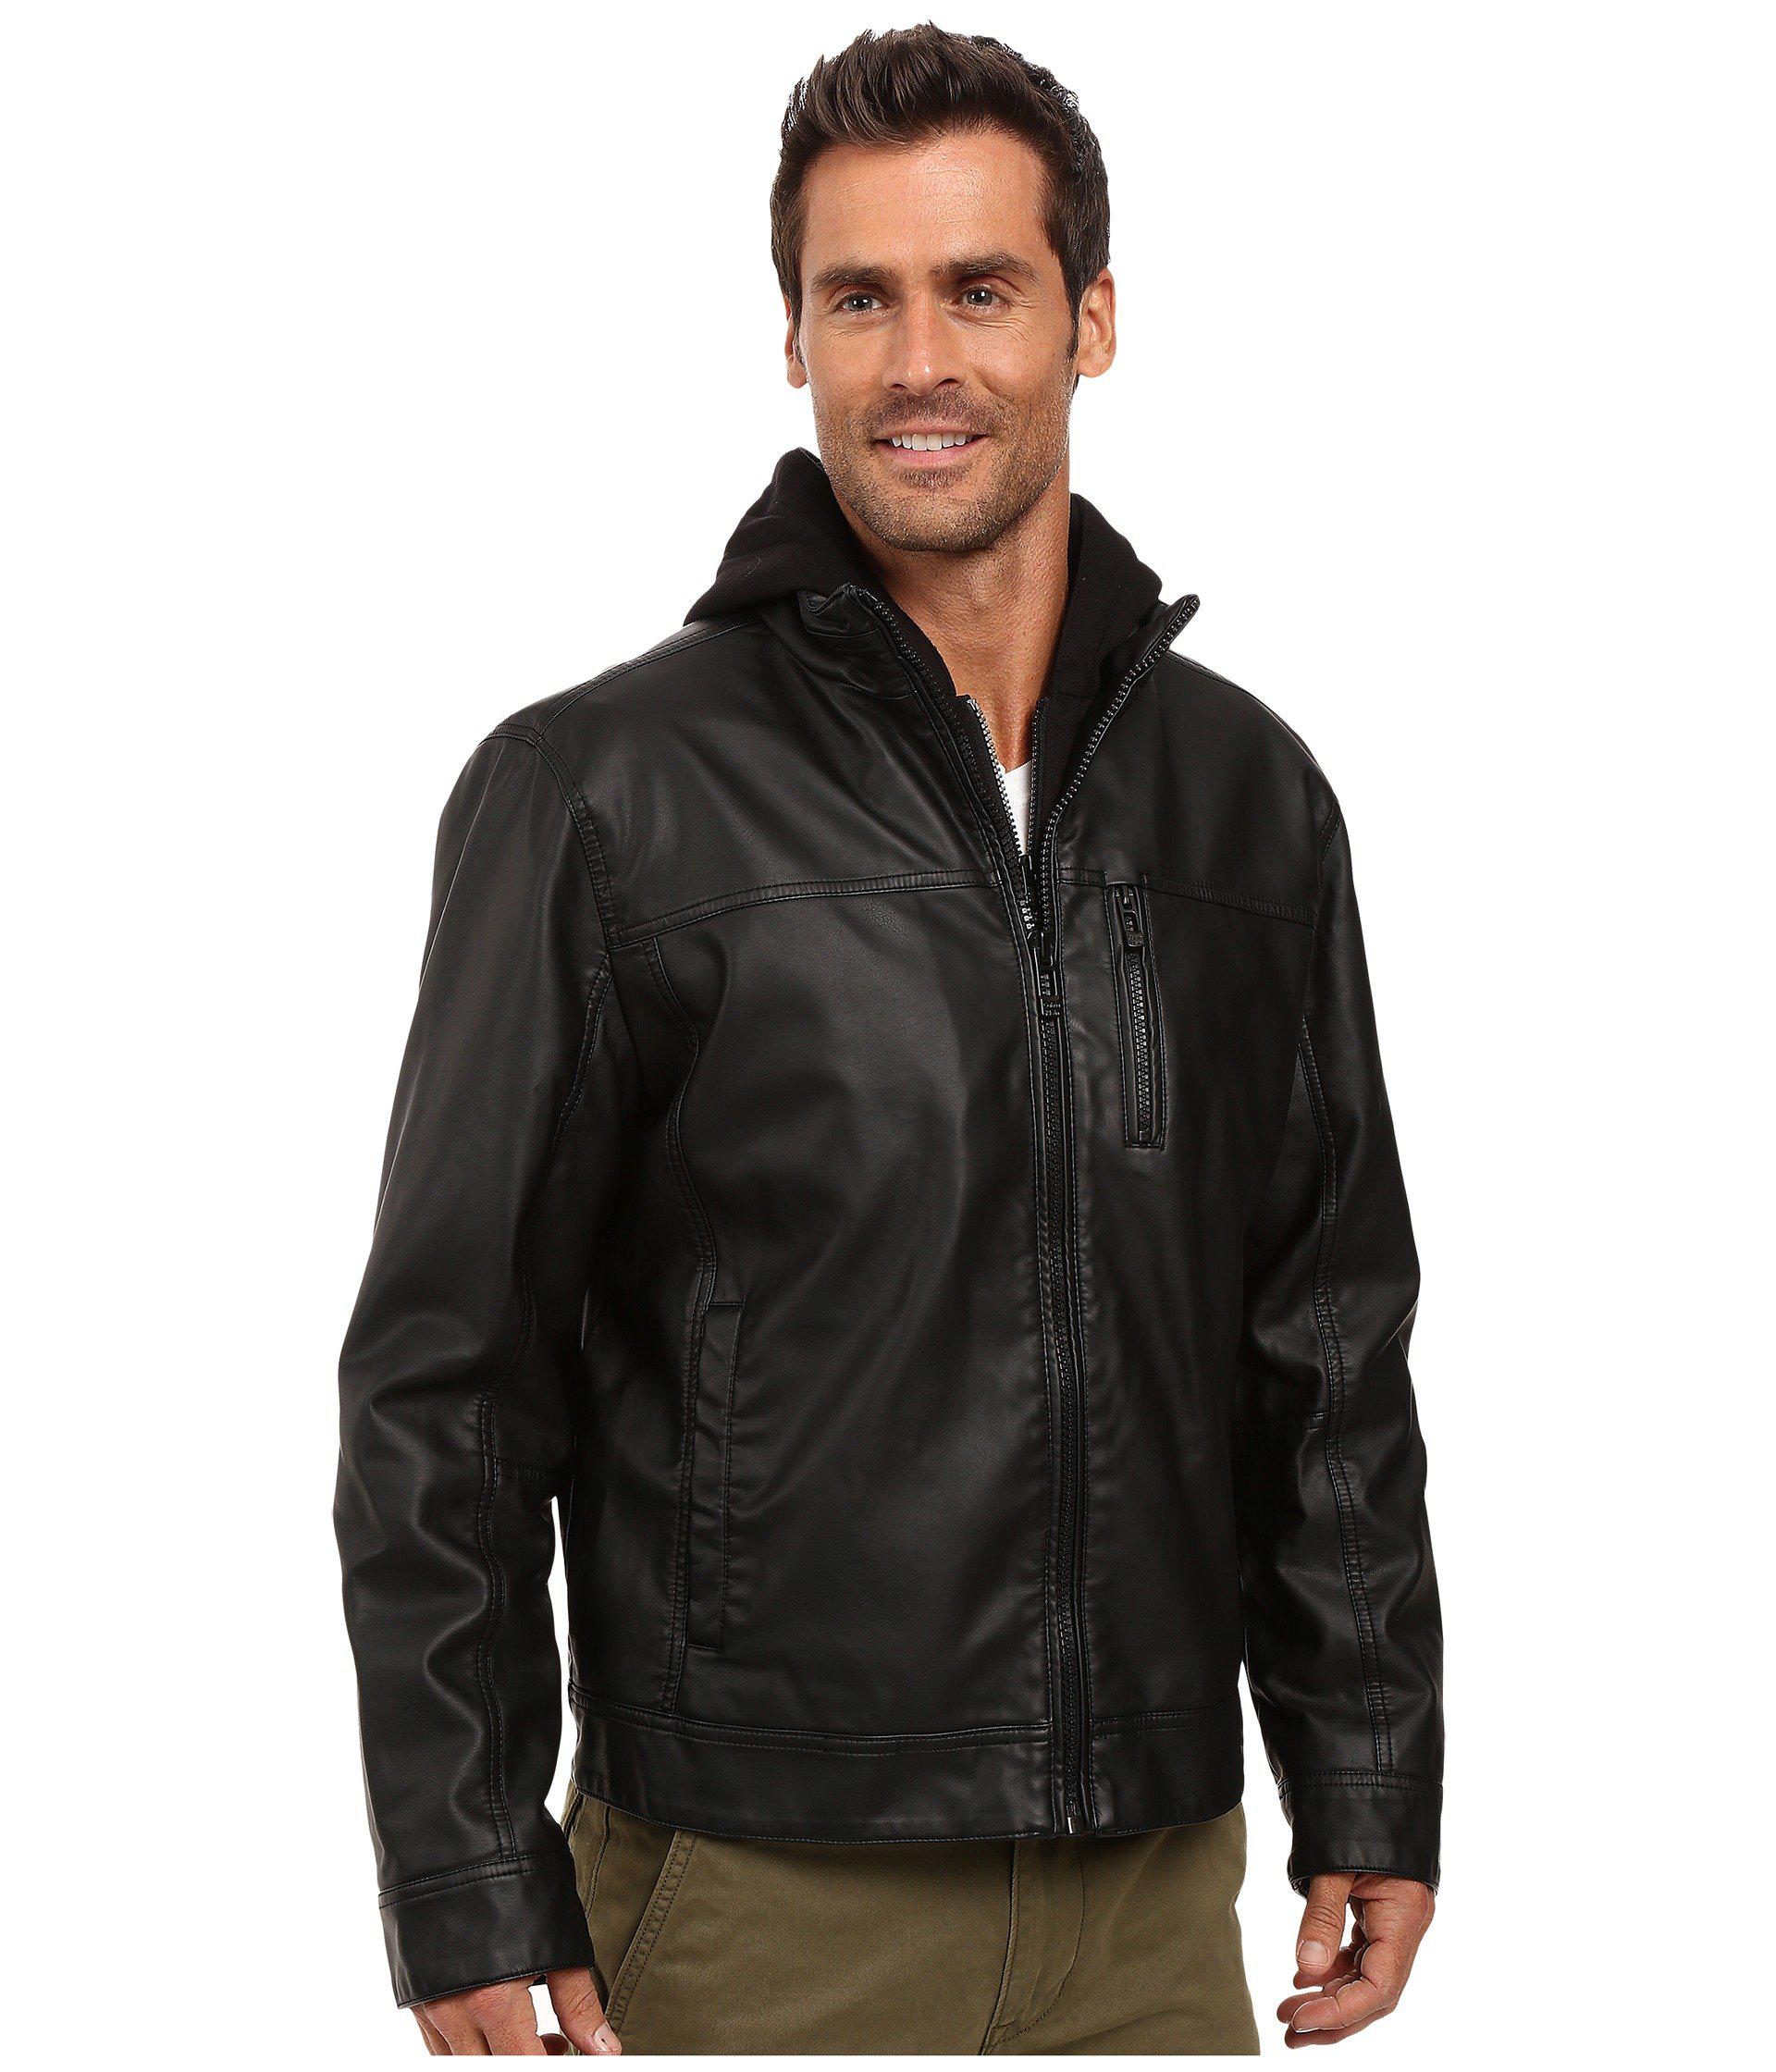 Calvin Klein Leather Jacket With Hoodie Outlet, 52% OFF | centro-innato.com